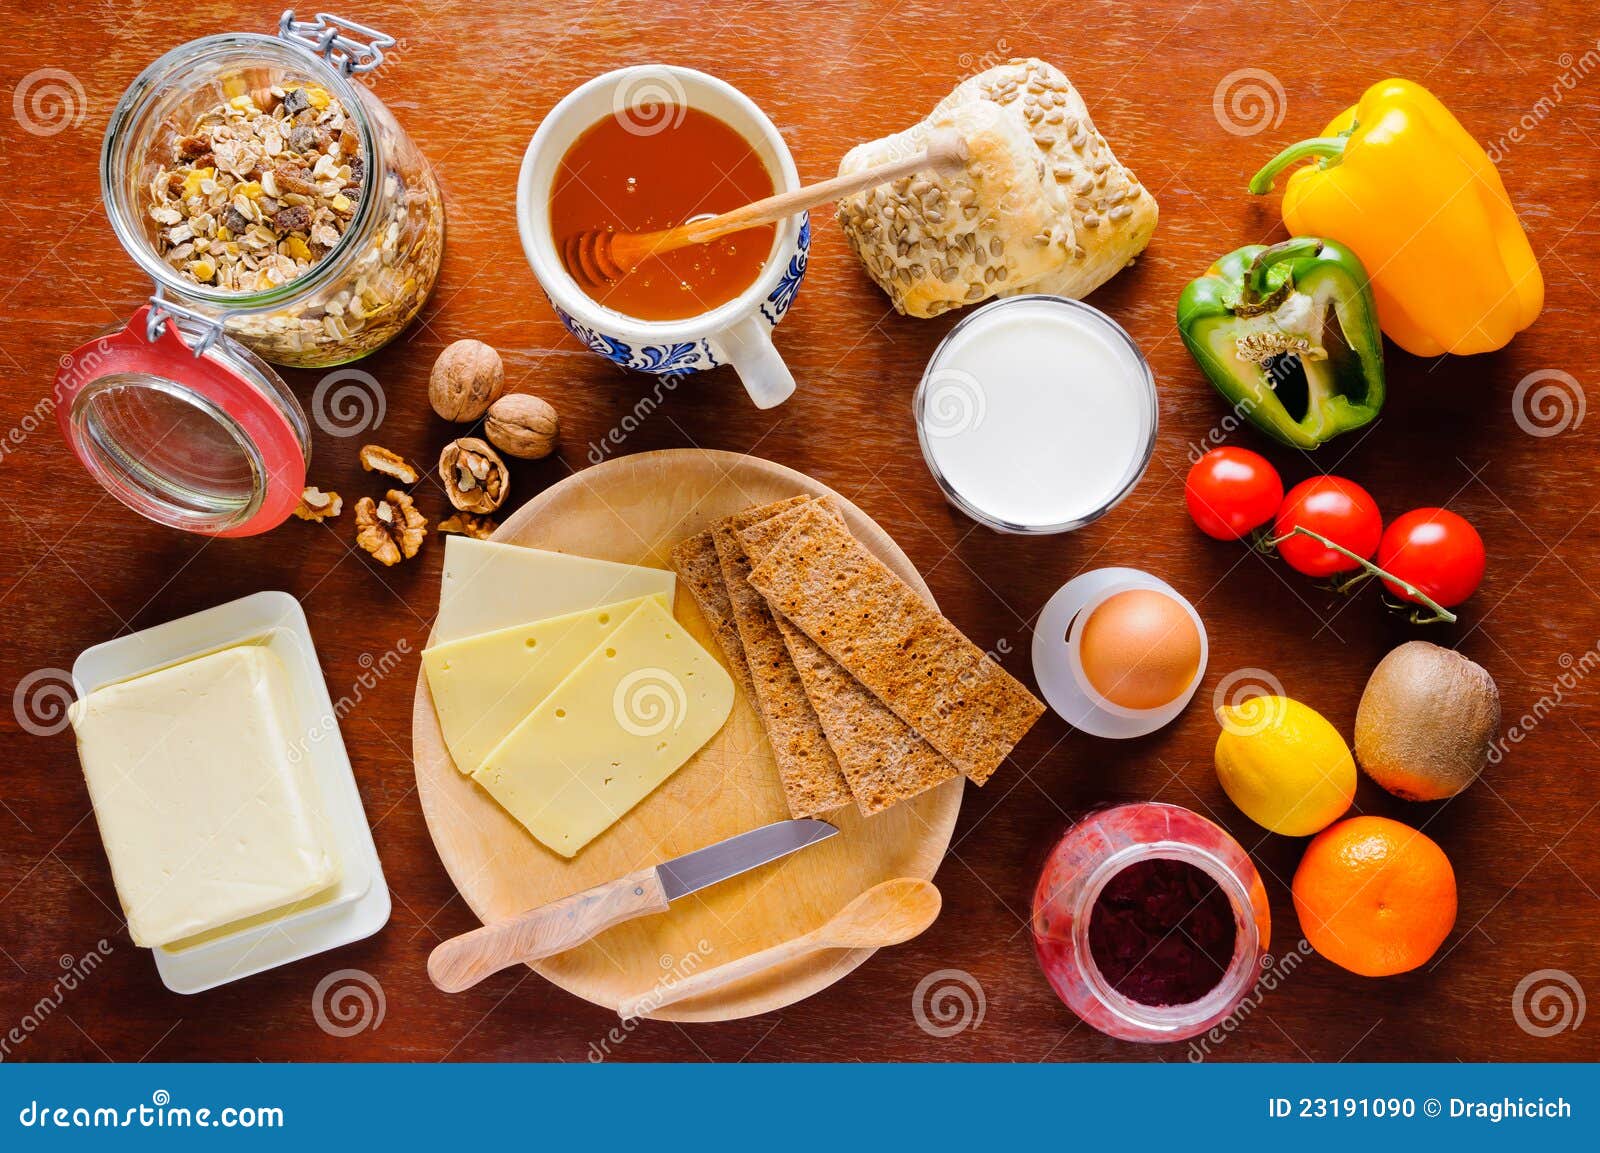 Breakfast Table With Healthy Food Stock Photo - Image: 23191090